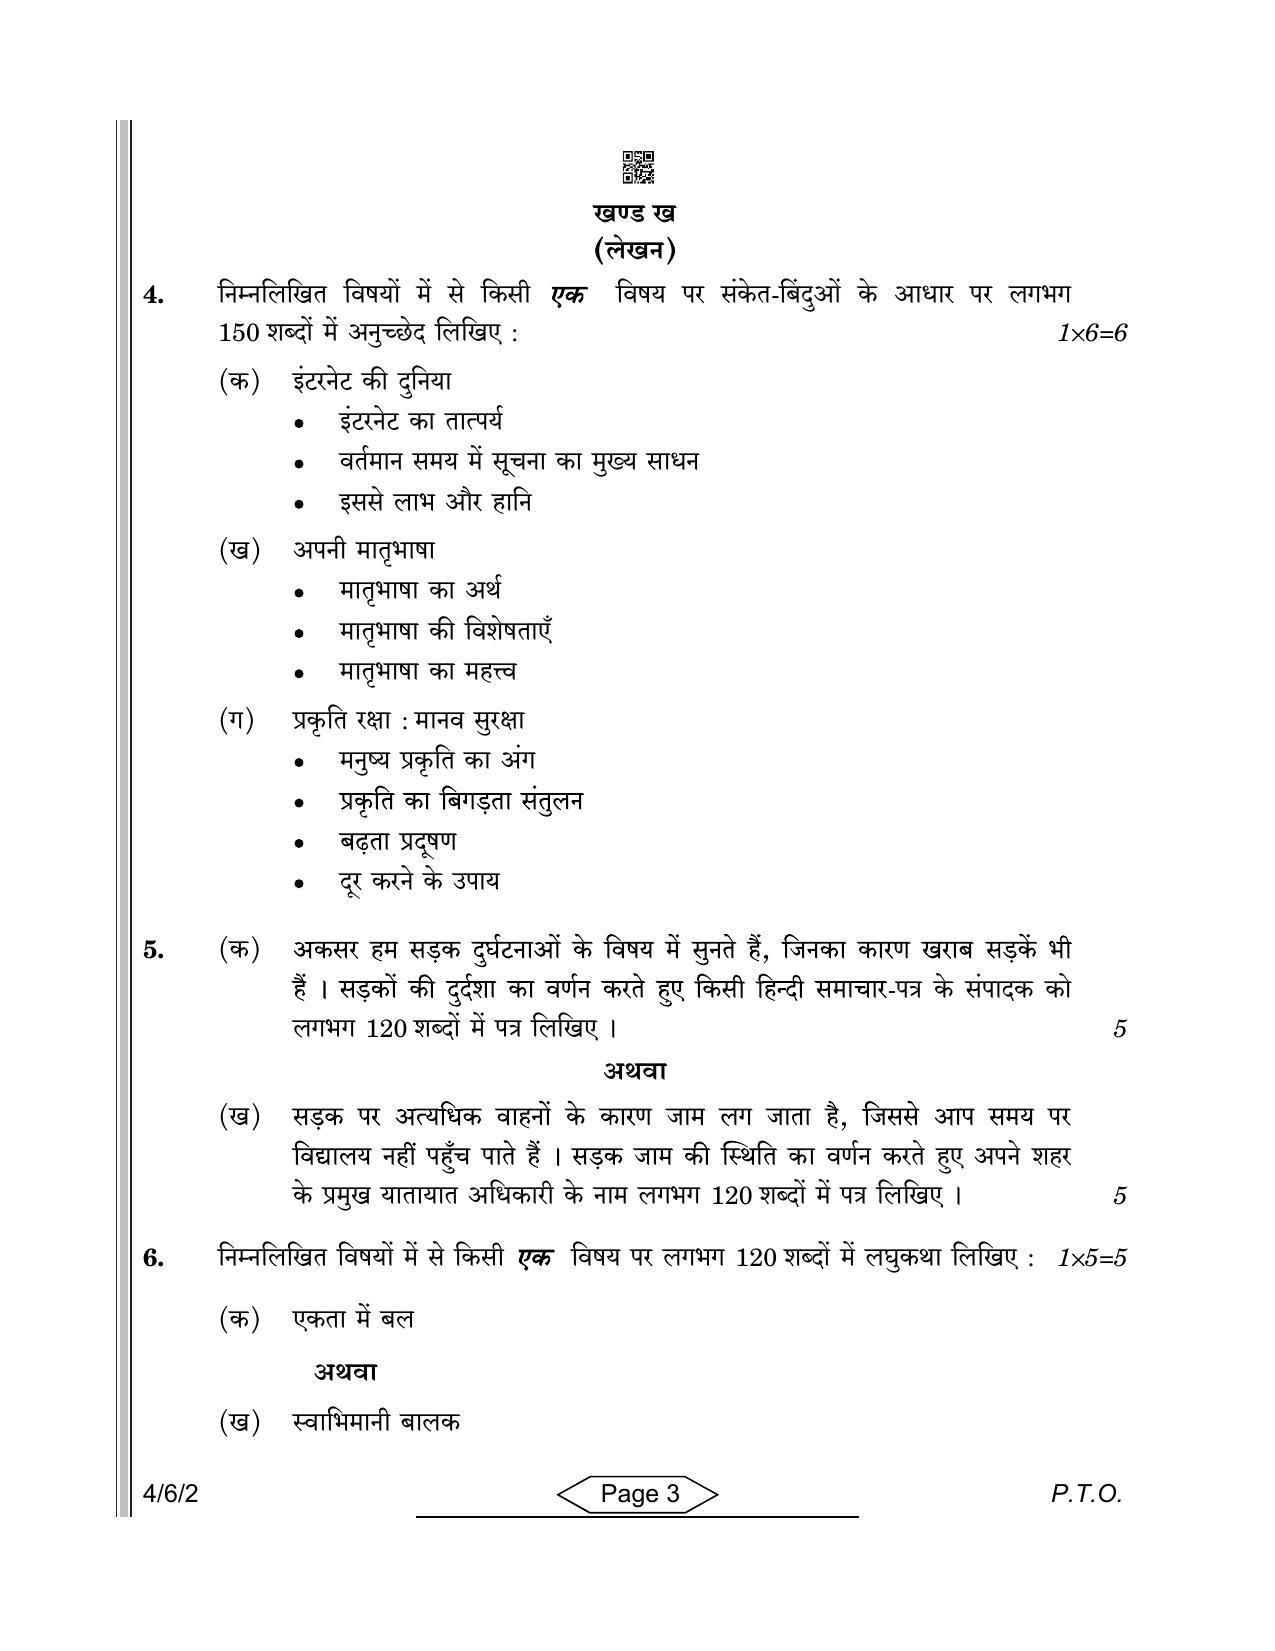 CBSE Class 10 4-6-2 Hindi-B 2022 Compartment Question Paper - Page 3